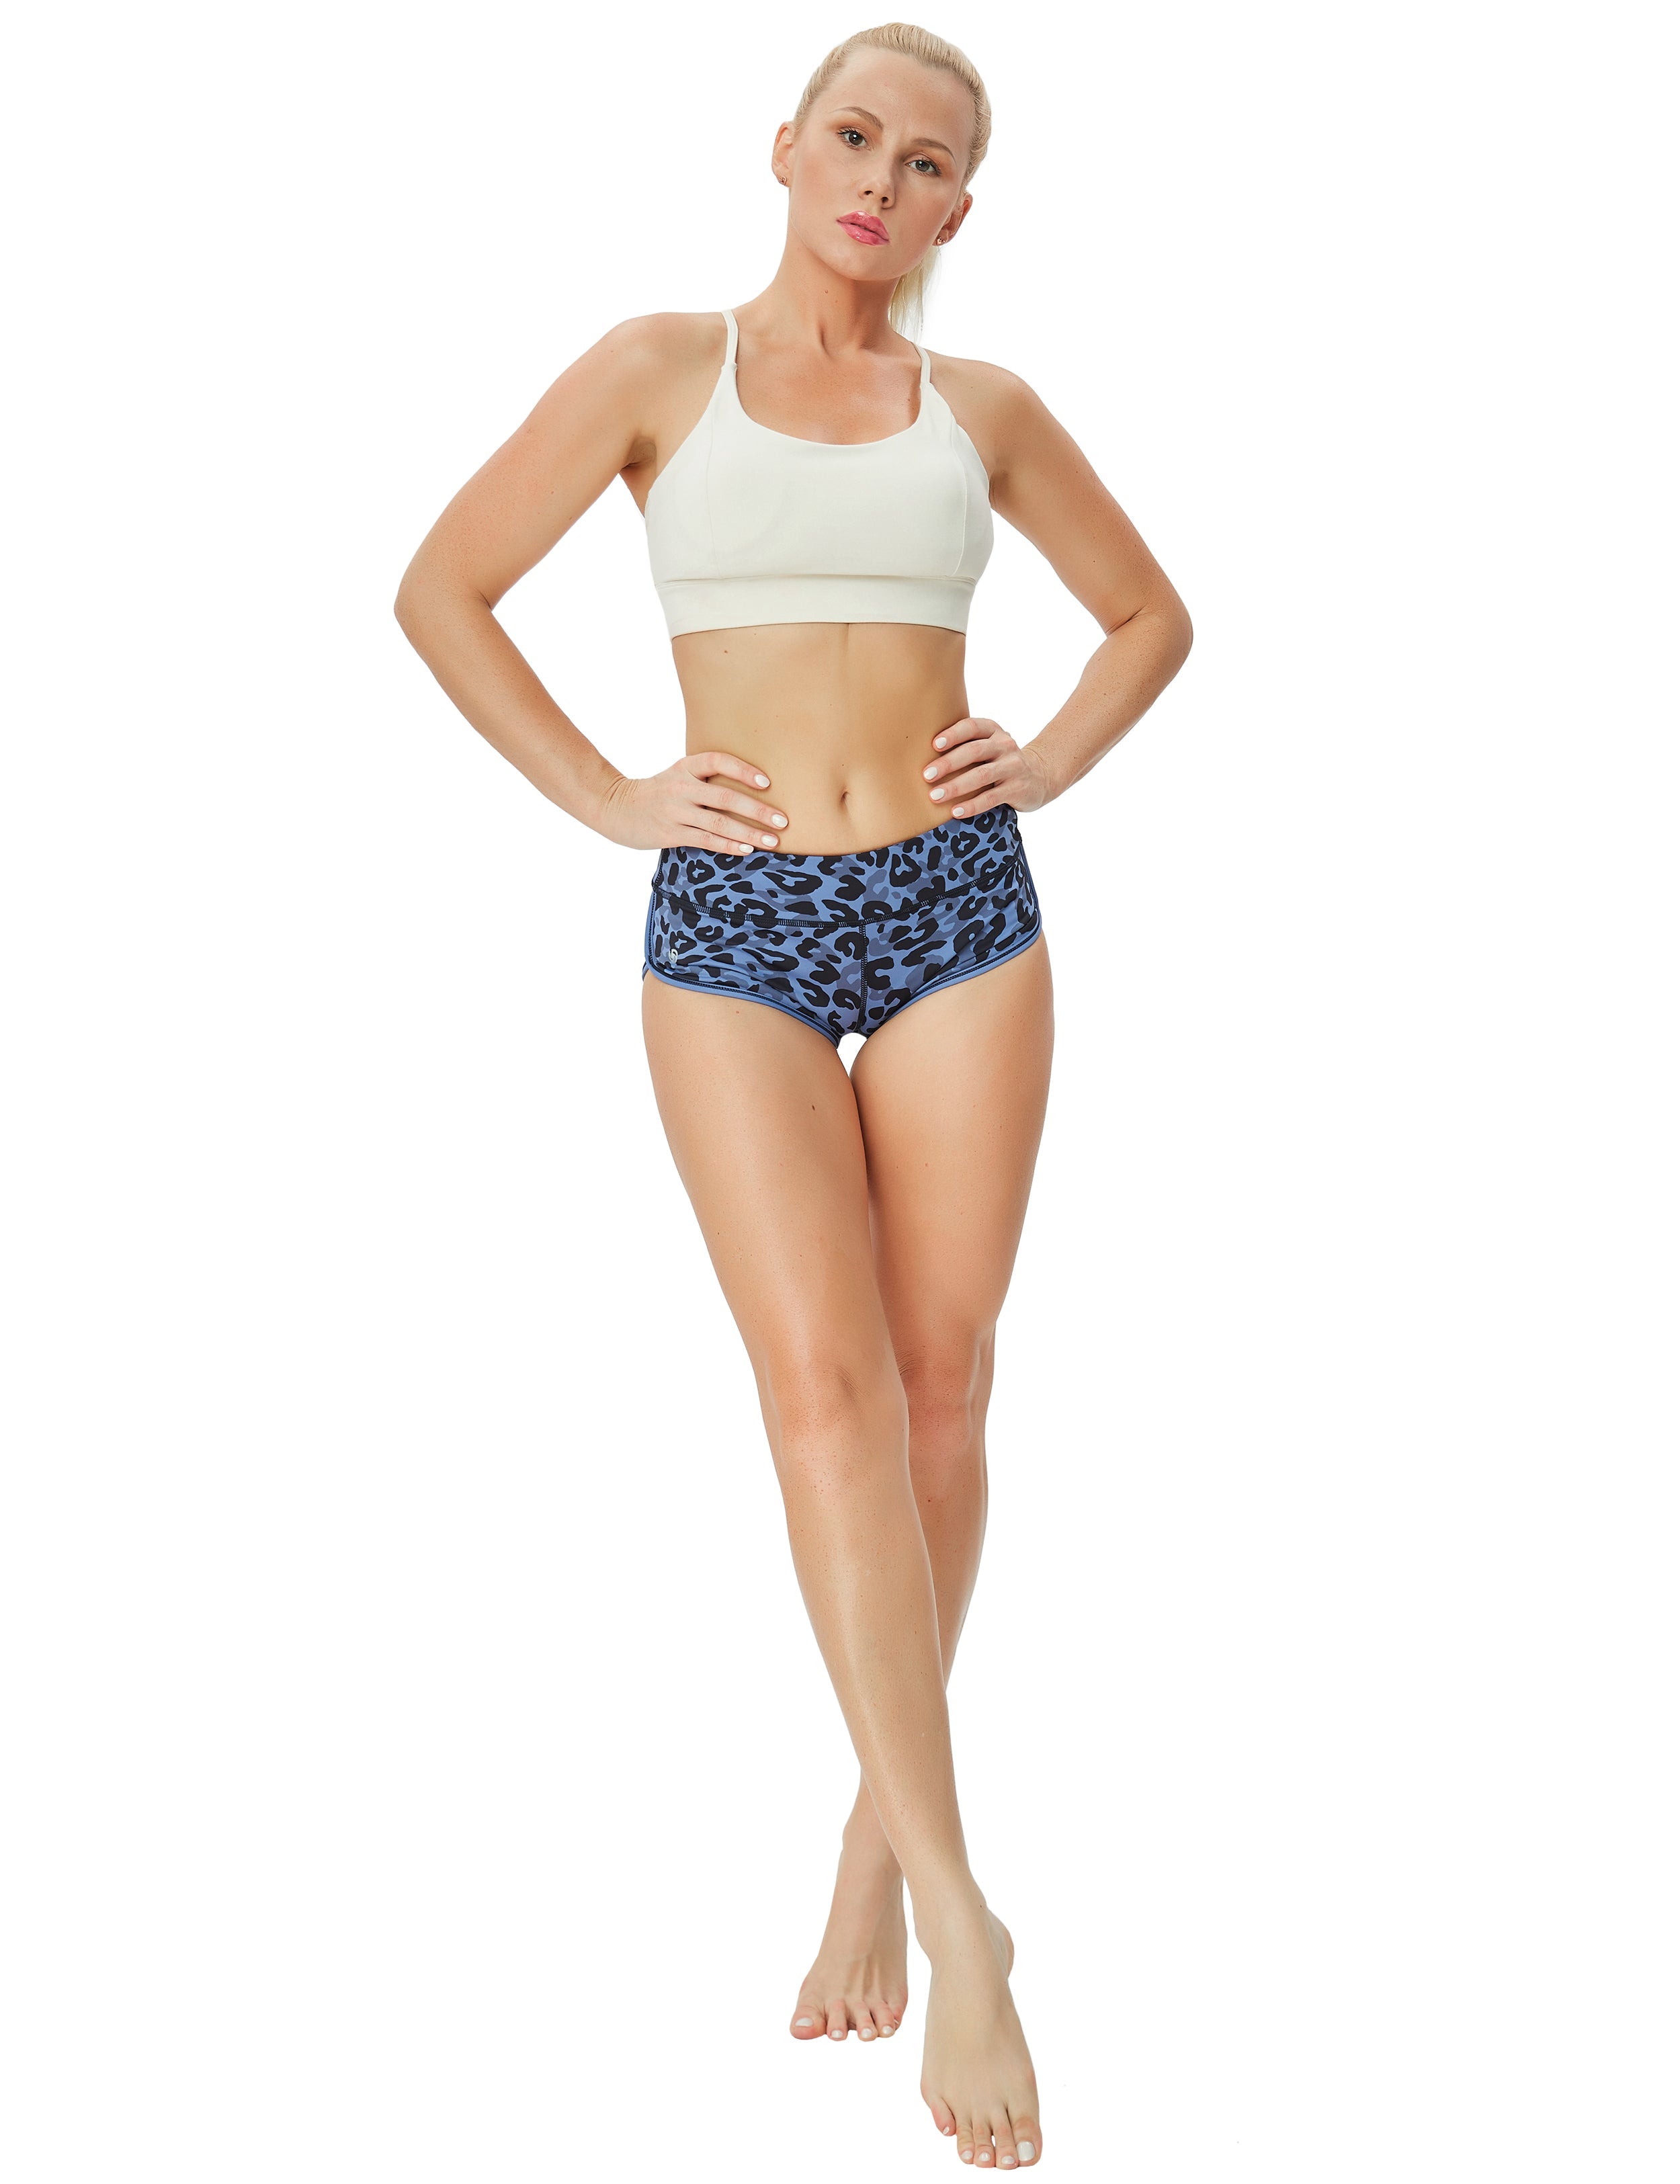 Printed Booty Pilates Shorts navy_leopard Sleek, soft, smooth and totally comfortable: our newest sexy style is here. Softest-ever fabric High elasticity High density 4-way stretch Fabric doesn't attract lint easily No see-through Moisture-wicking Machine wash 78% Polyester, 22% Spandex